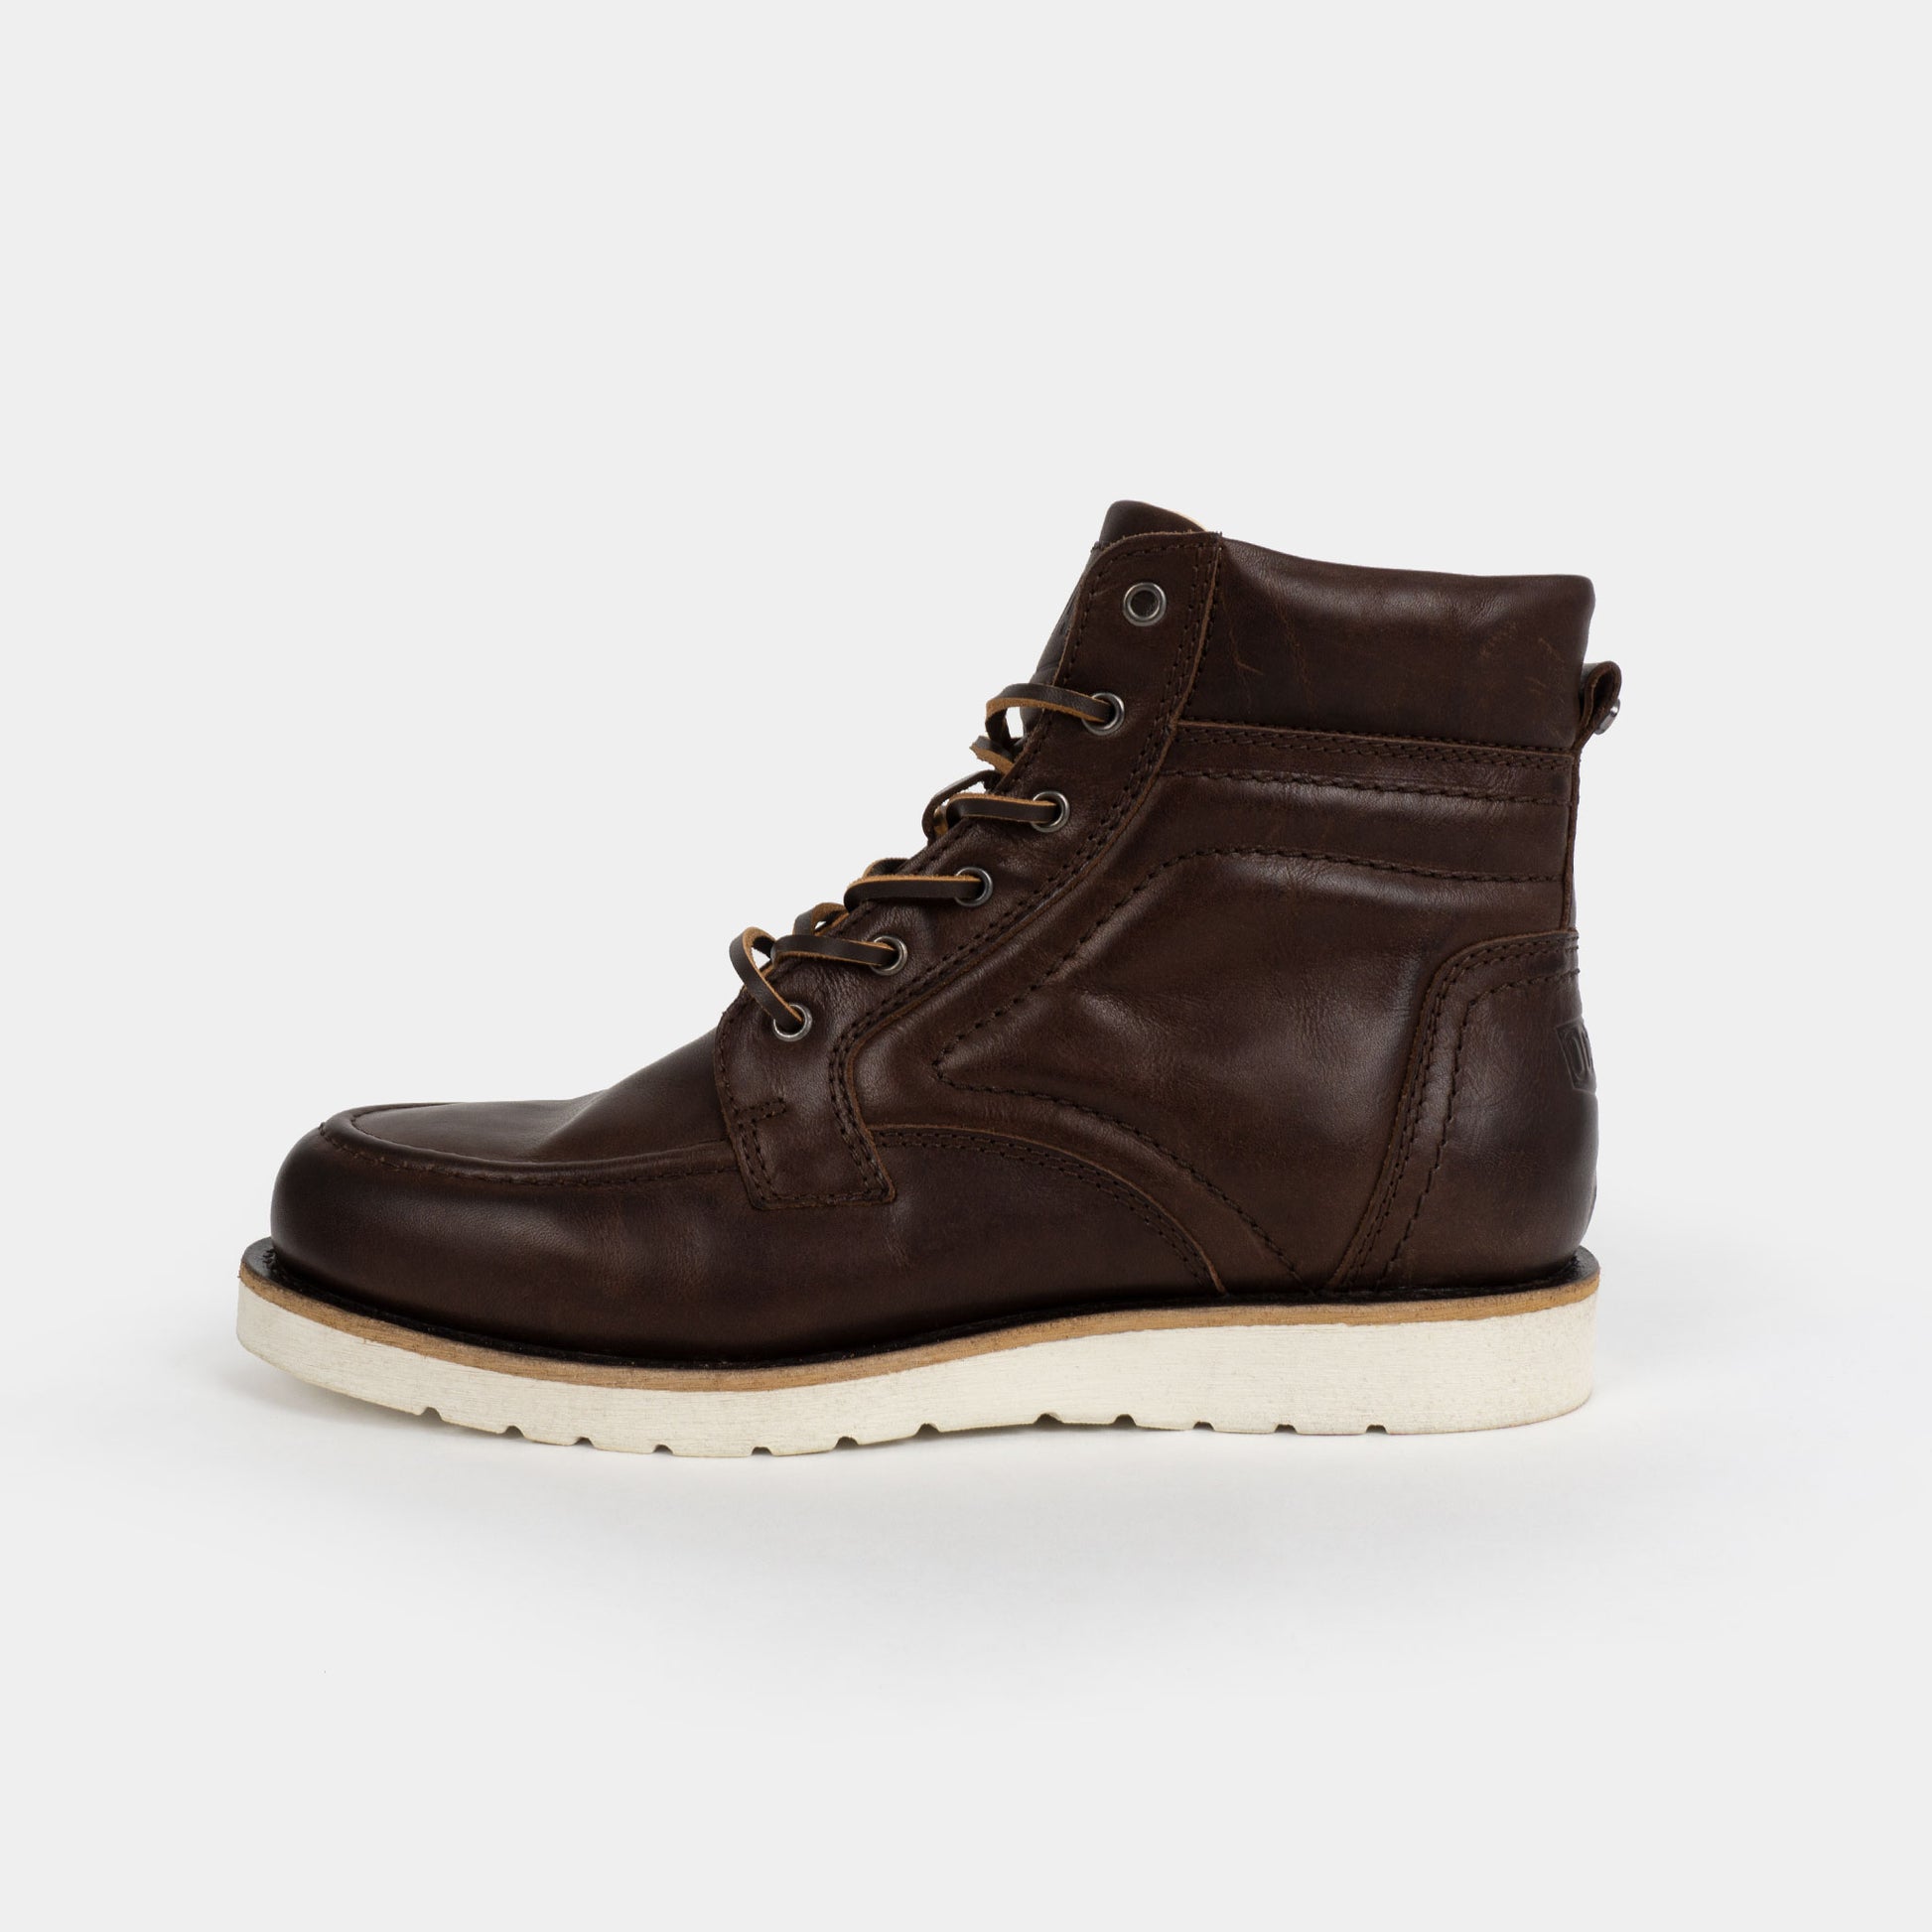 MT-622 moc toe leather boots in dark brown